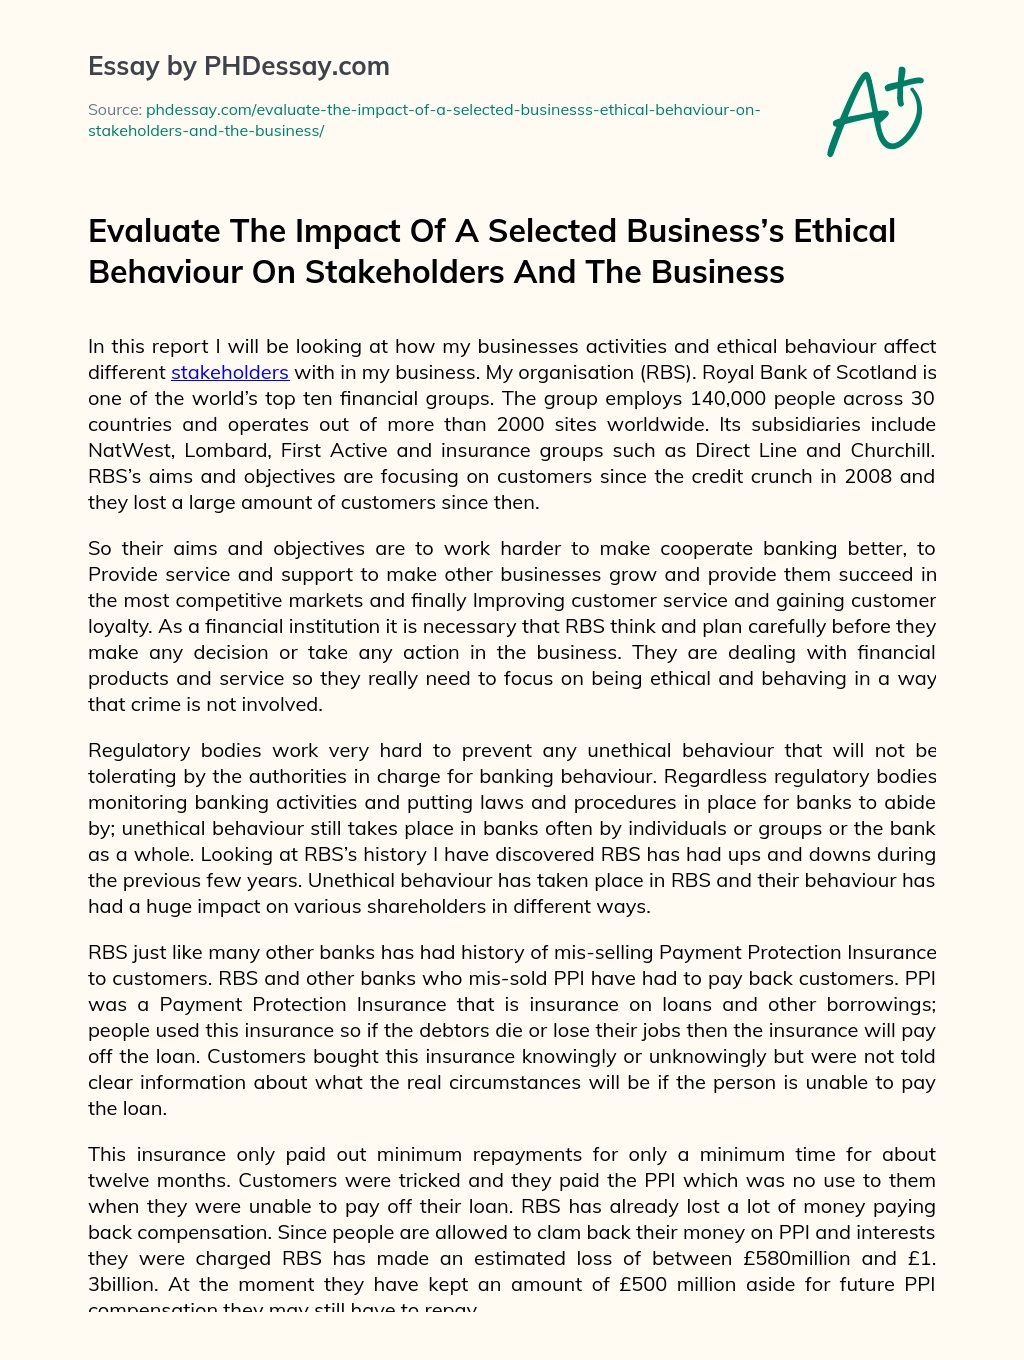 Evaluate The Impact Of A Selected Business’s Ethical Behaviour On Stakeholders And The Business essay